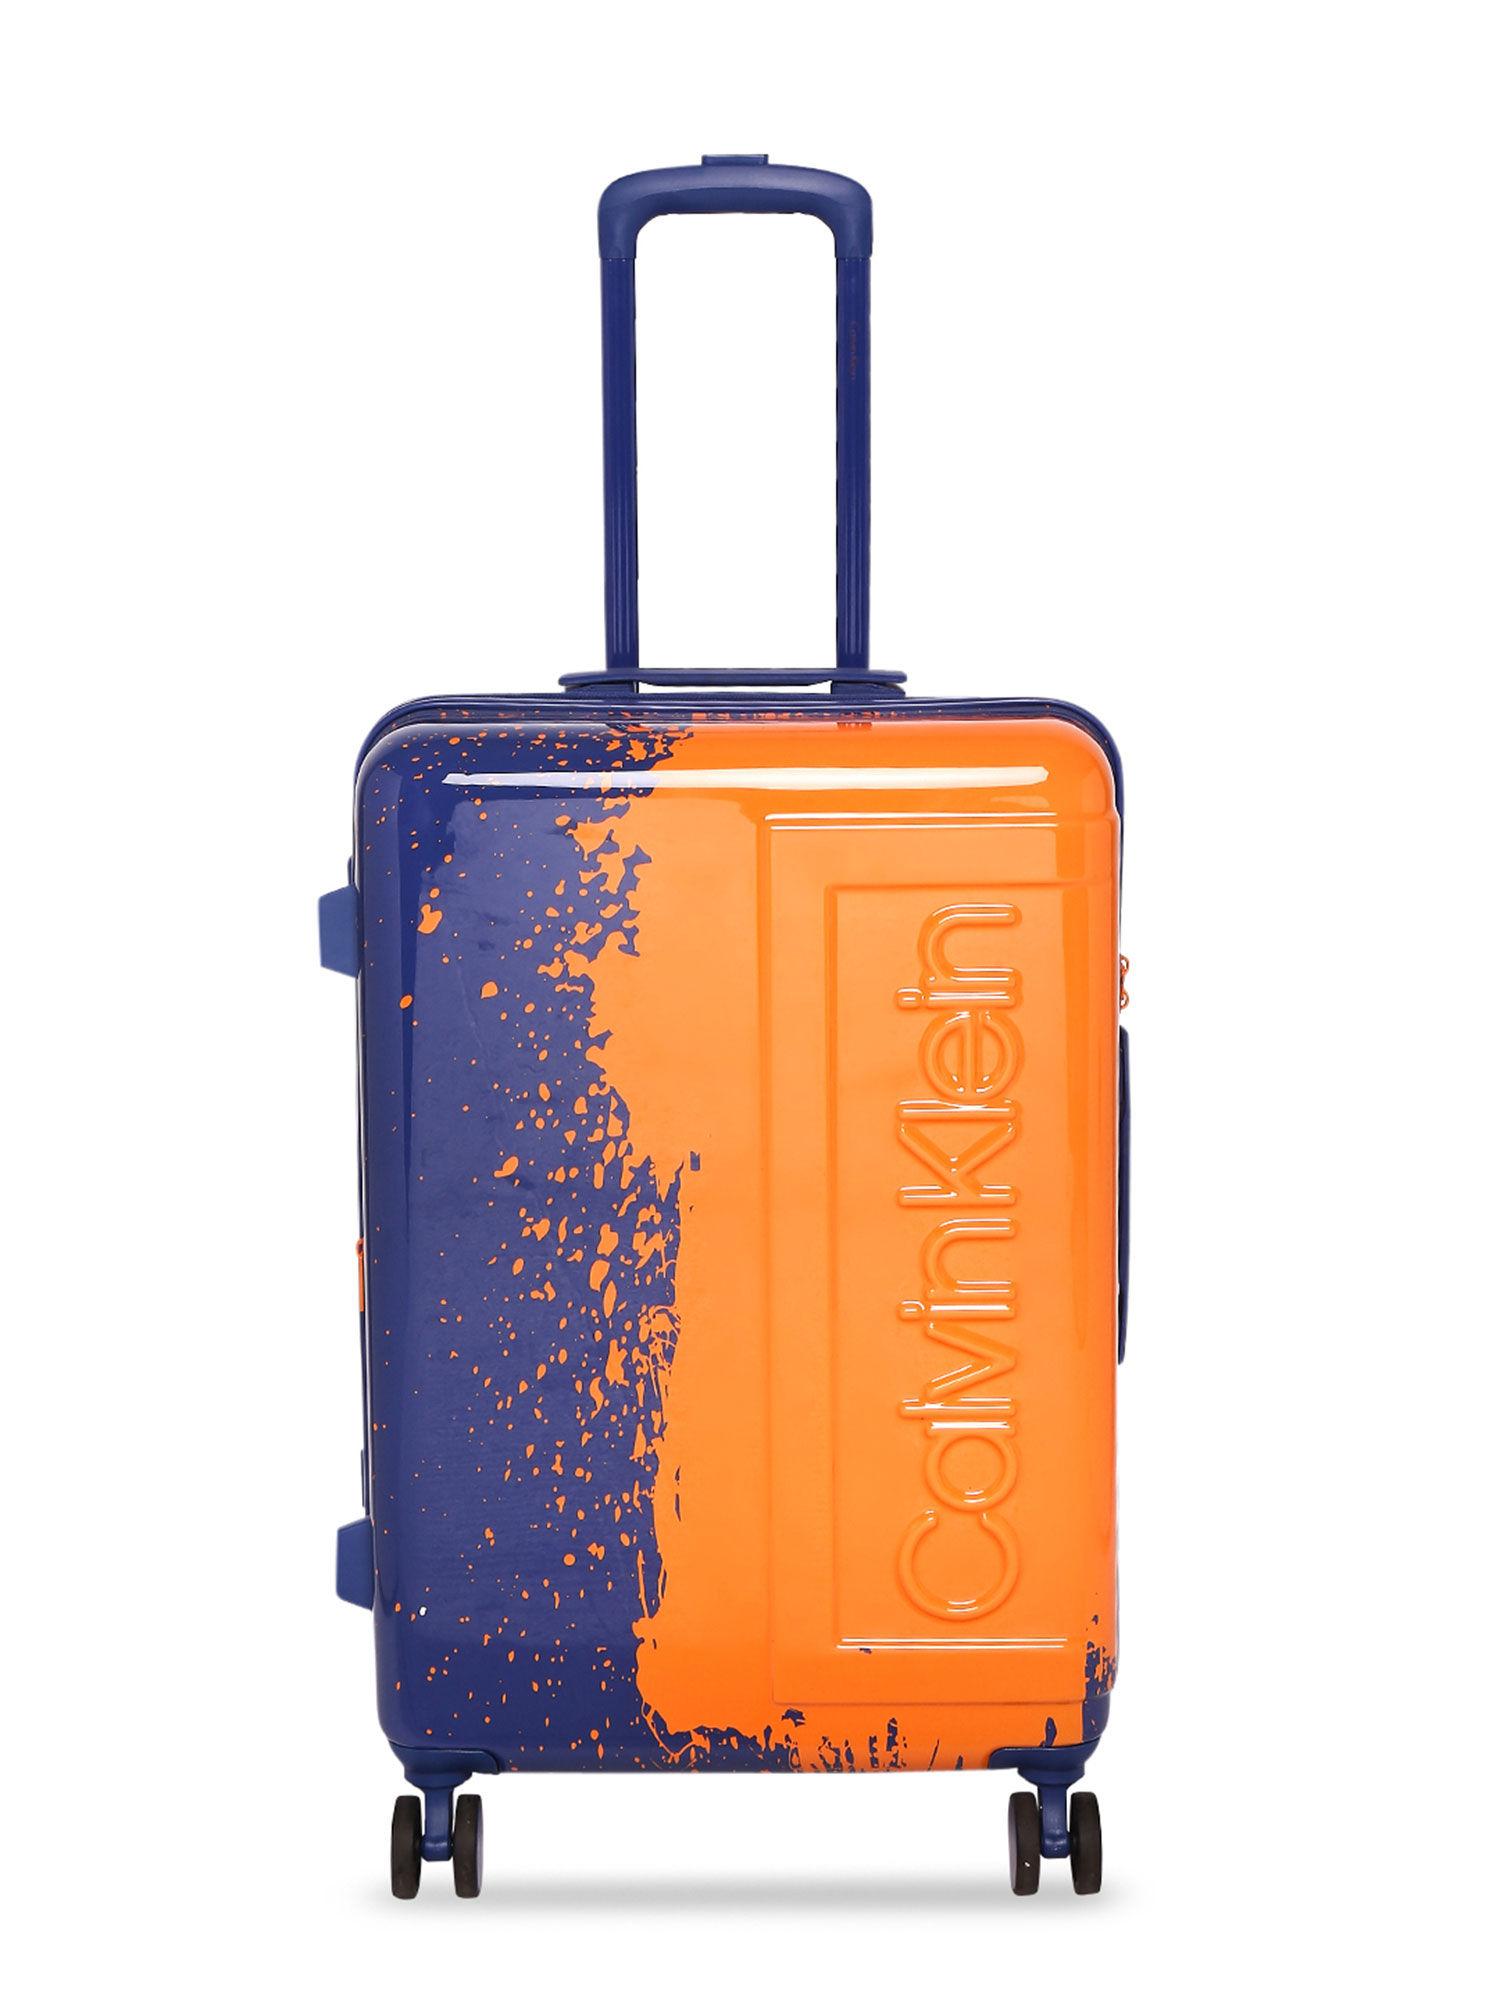 the-factory-royal-blue-color-abs-material-hard-28"-large-size-trolley